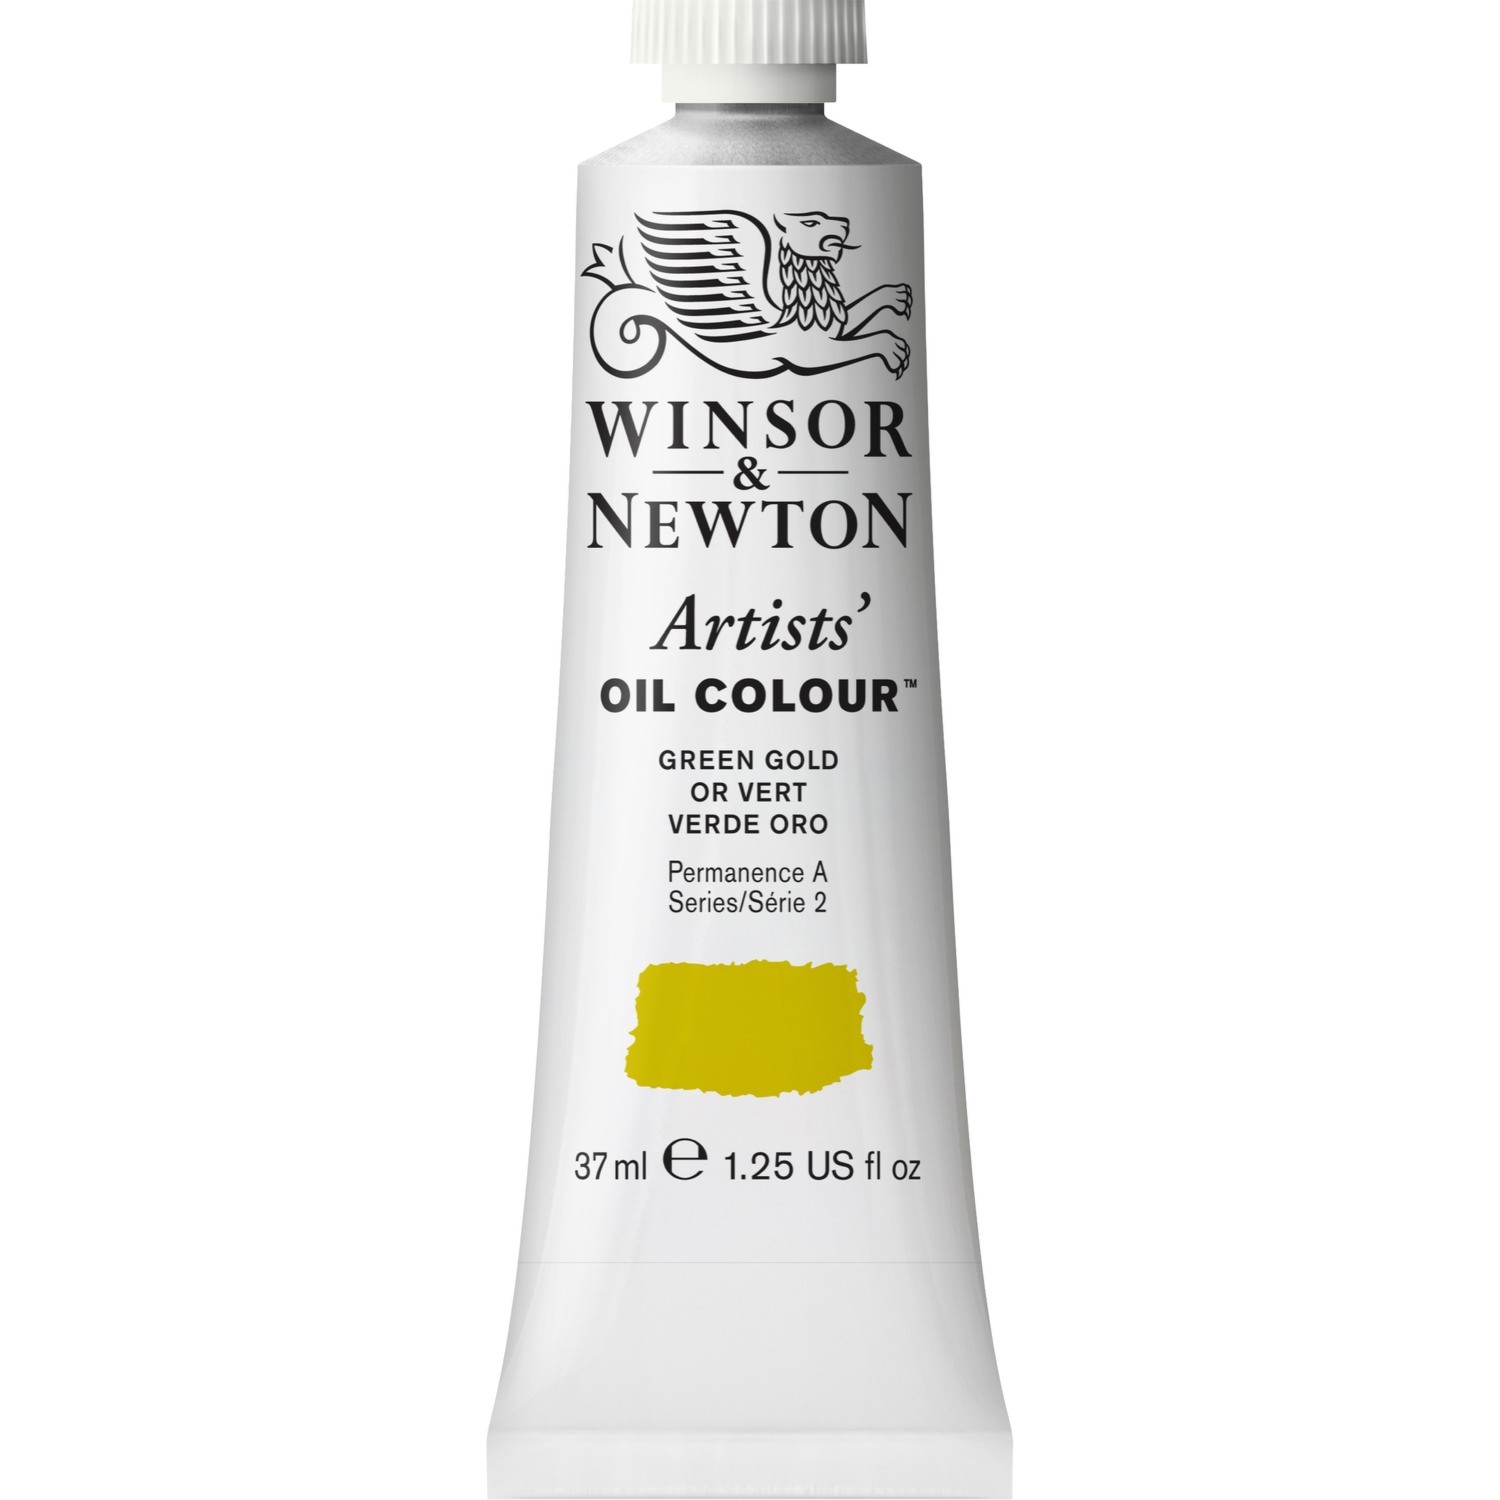 Winsor and Newton 37ml Artists' Oil Colours - Green Gold Image 1